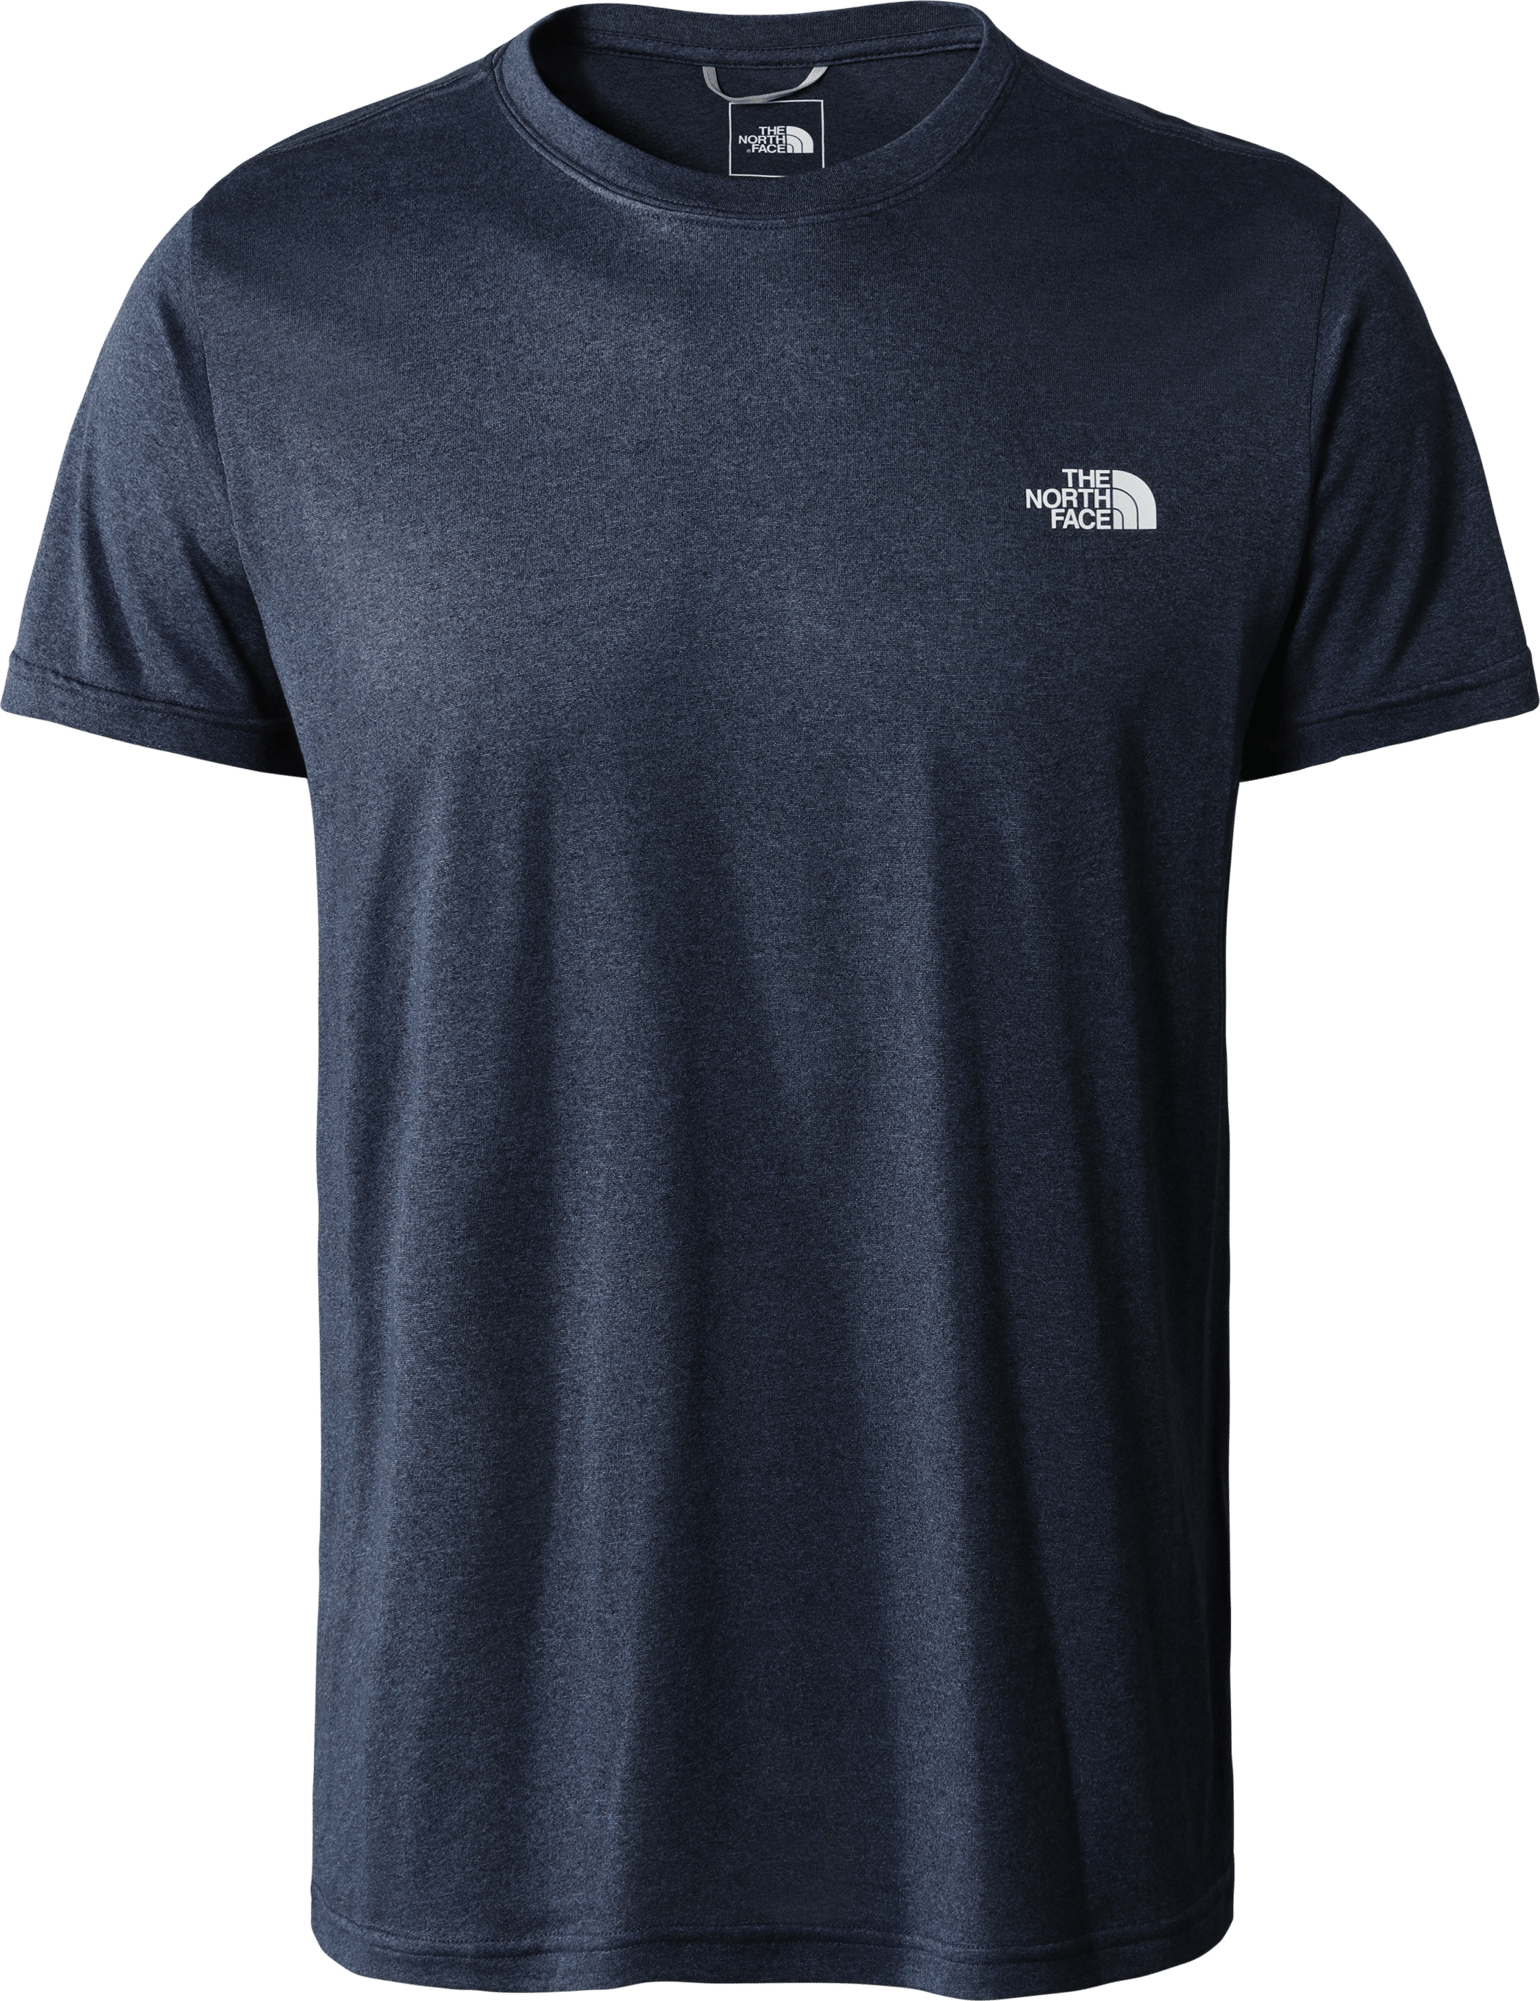 The North Face Men's Reaxion Amp T-Shirt Shady Blue Heather